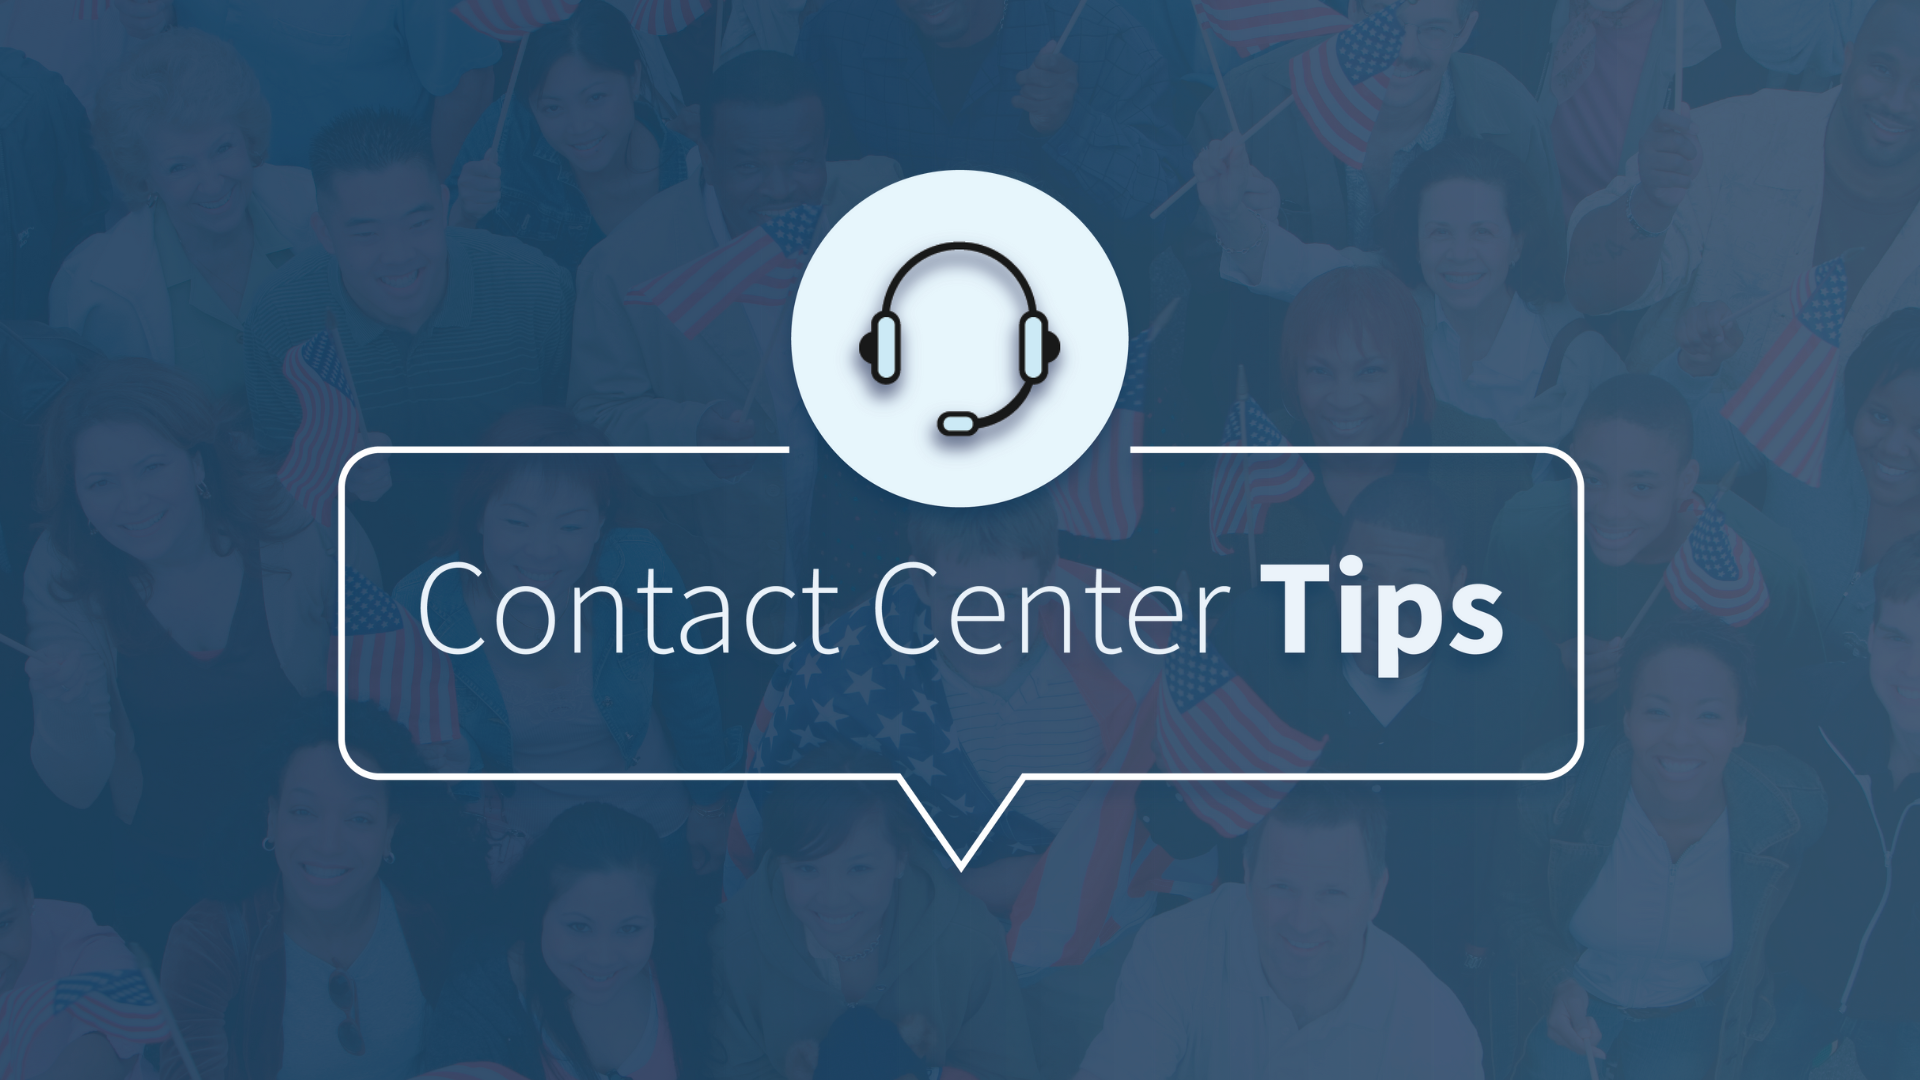 Blue background with headset icon and contact center tips text